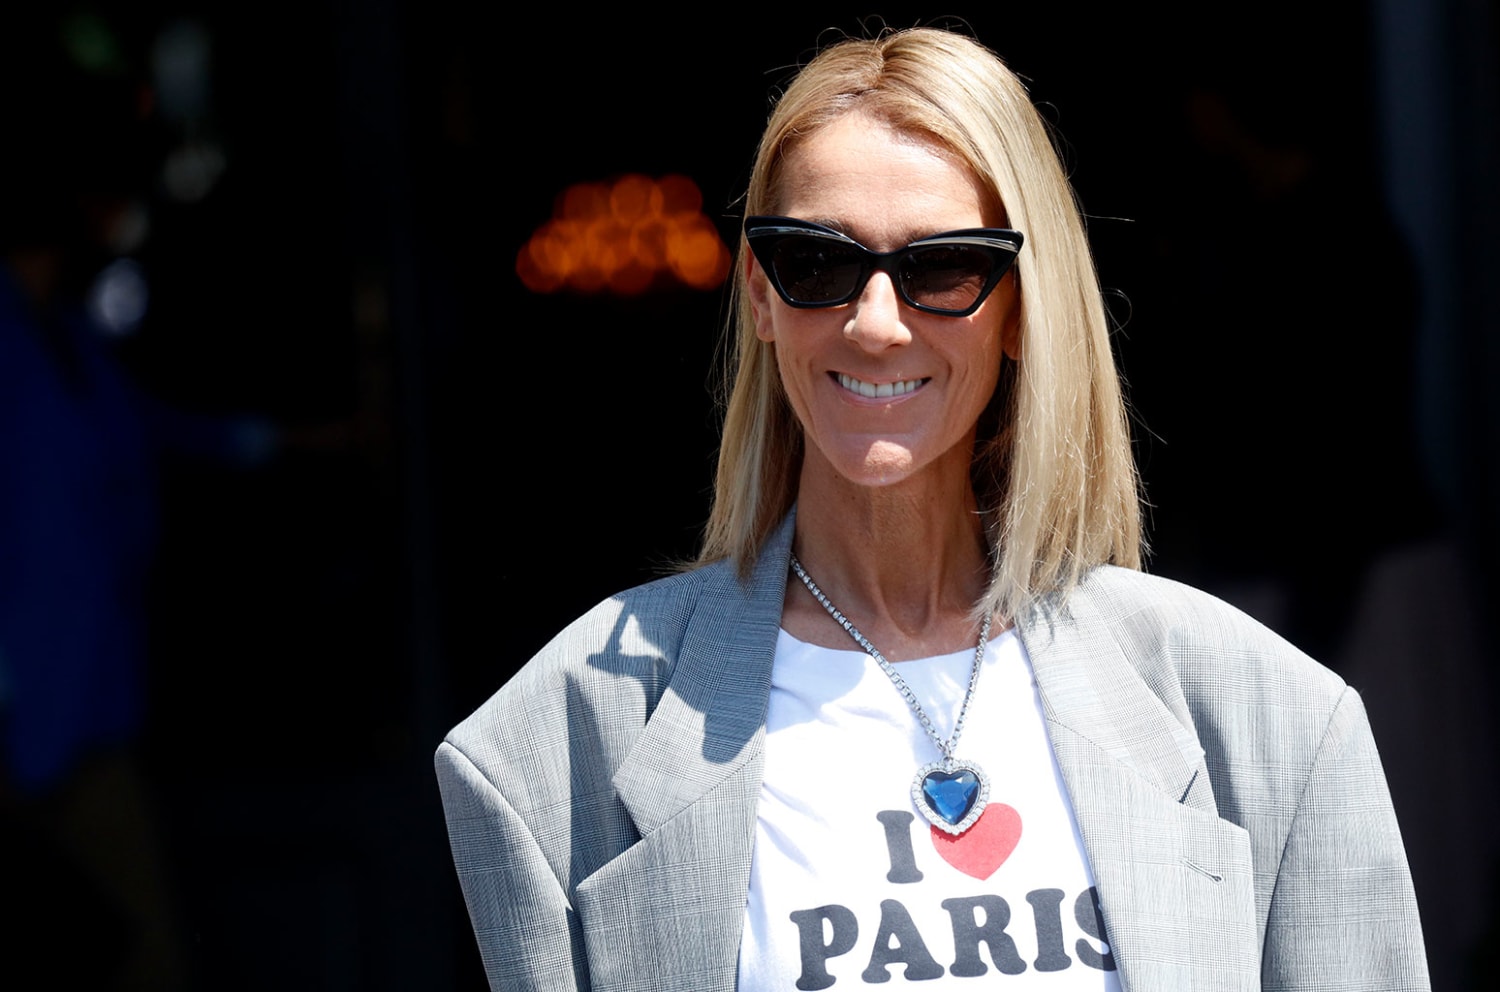 Celine Dion Spotted Wearing Replica of Iconic 'Titanic' Necklace in Paris